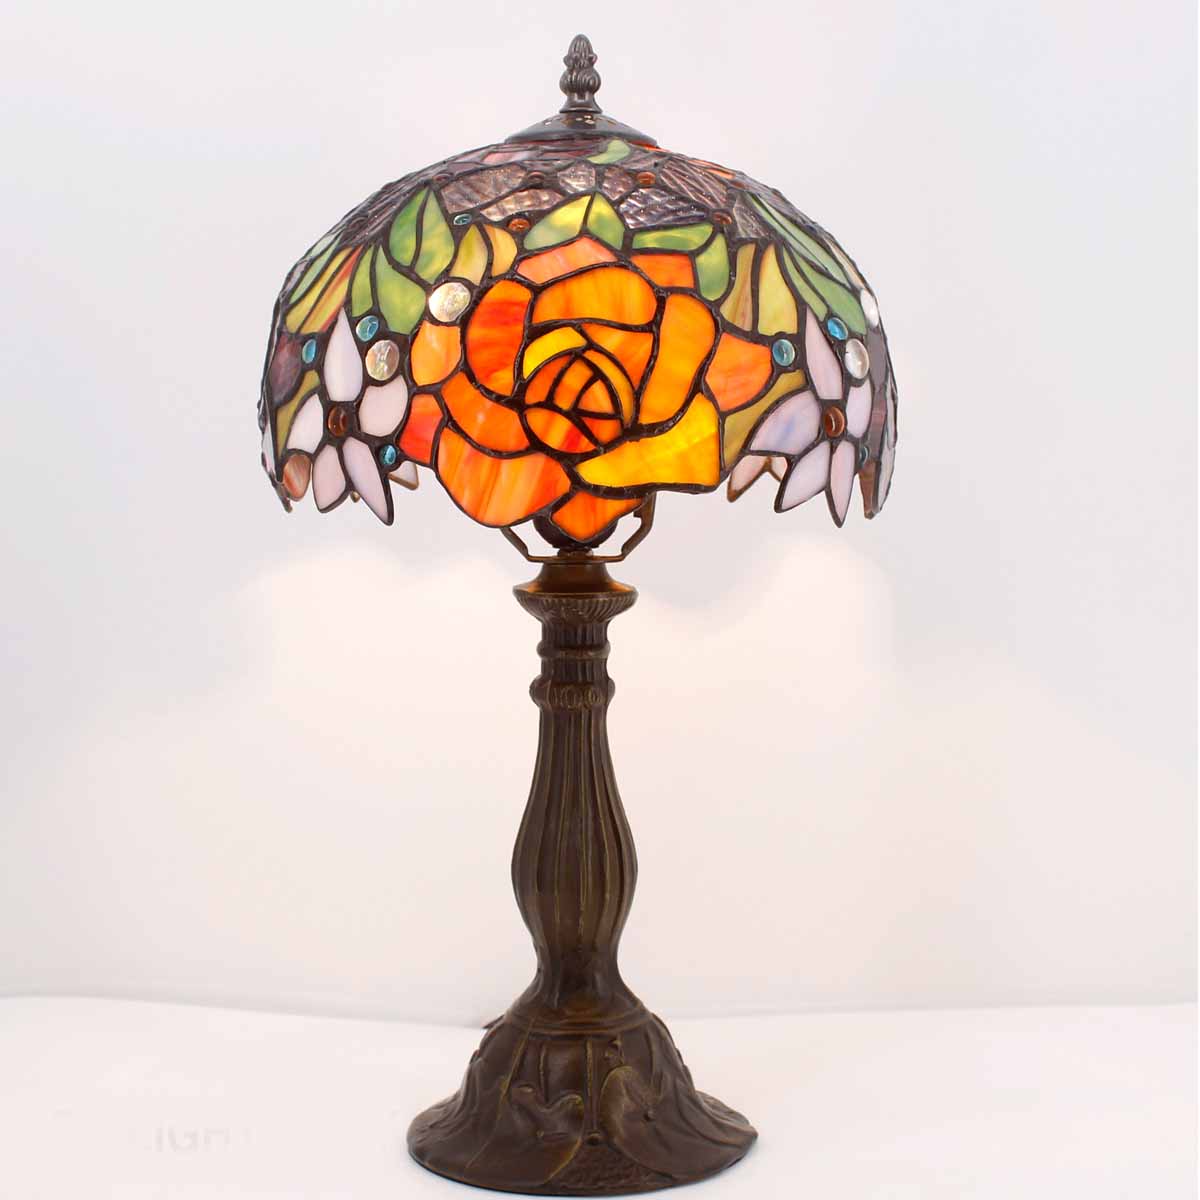 Werfactory® Tiffany Table Lamp 10 Inch